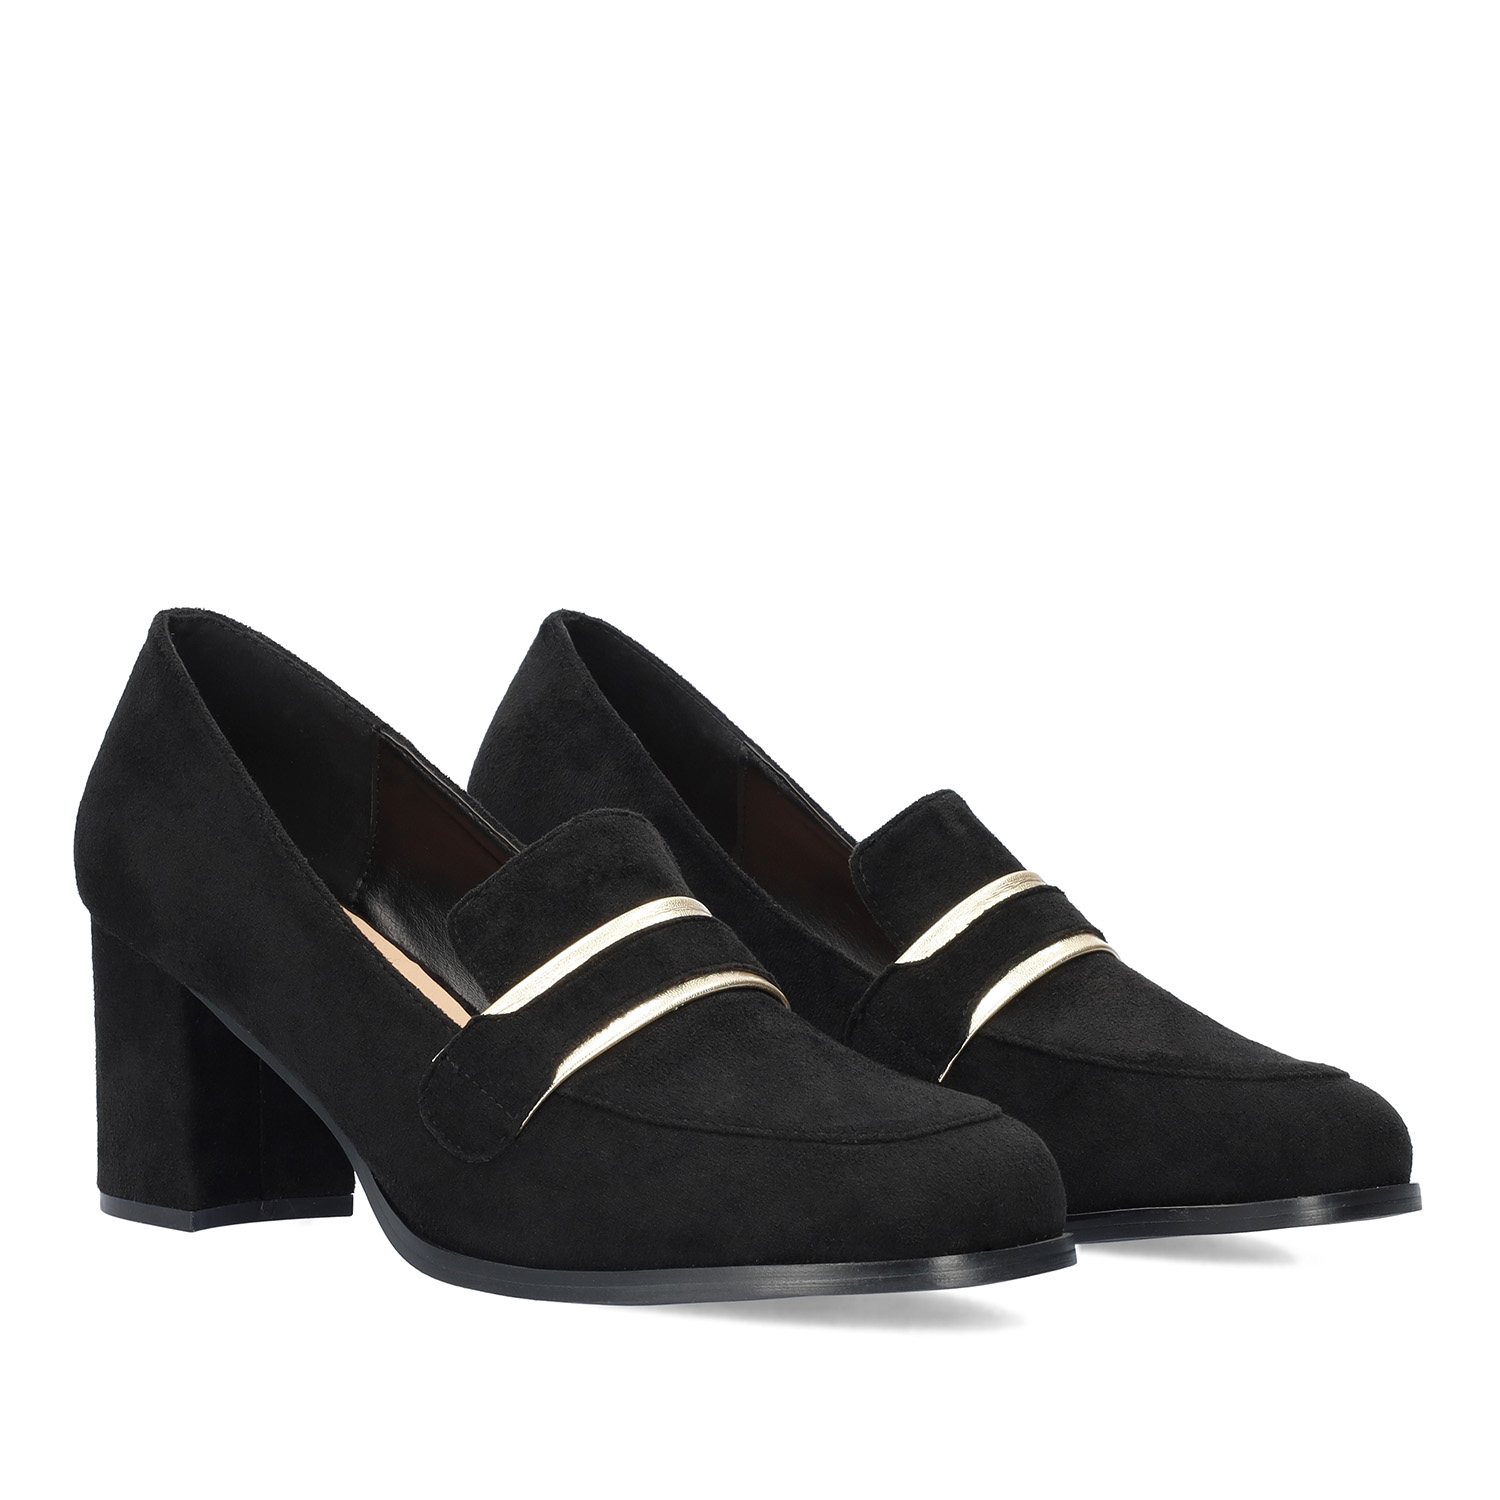 Heeled moccasins in black-colored faux suede 